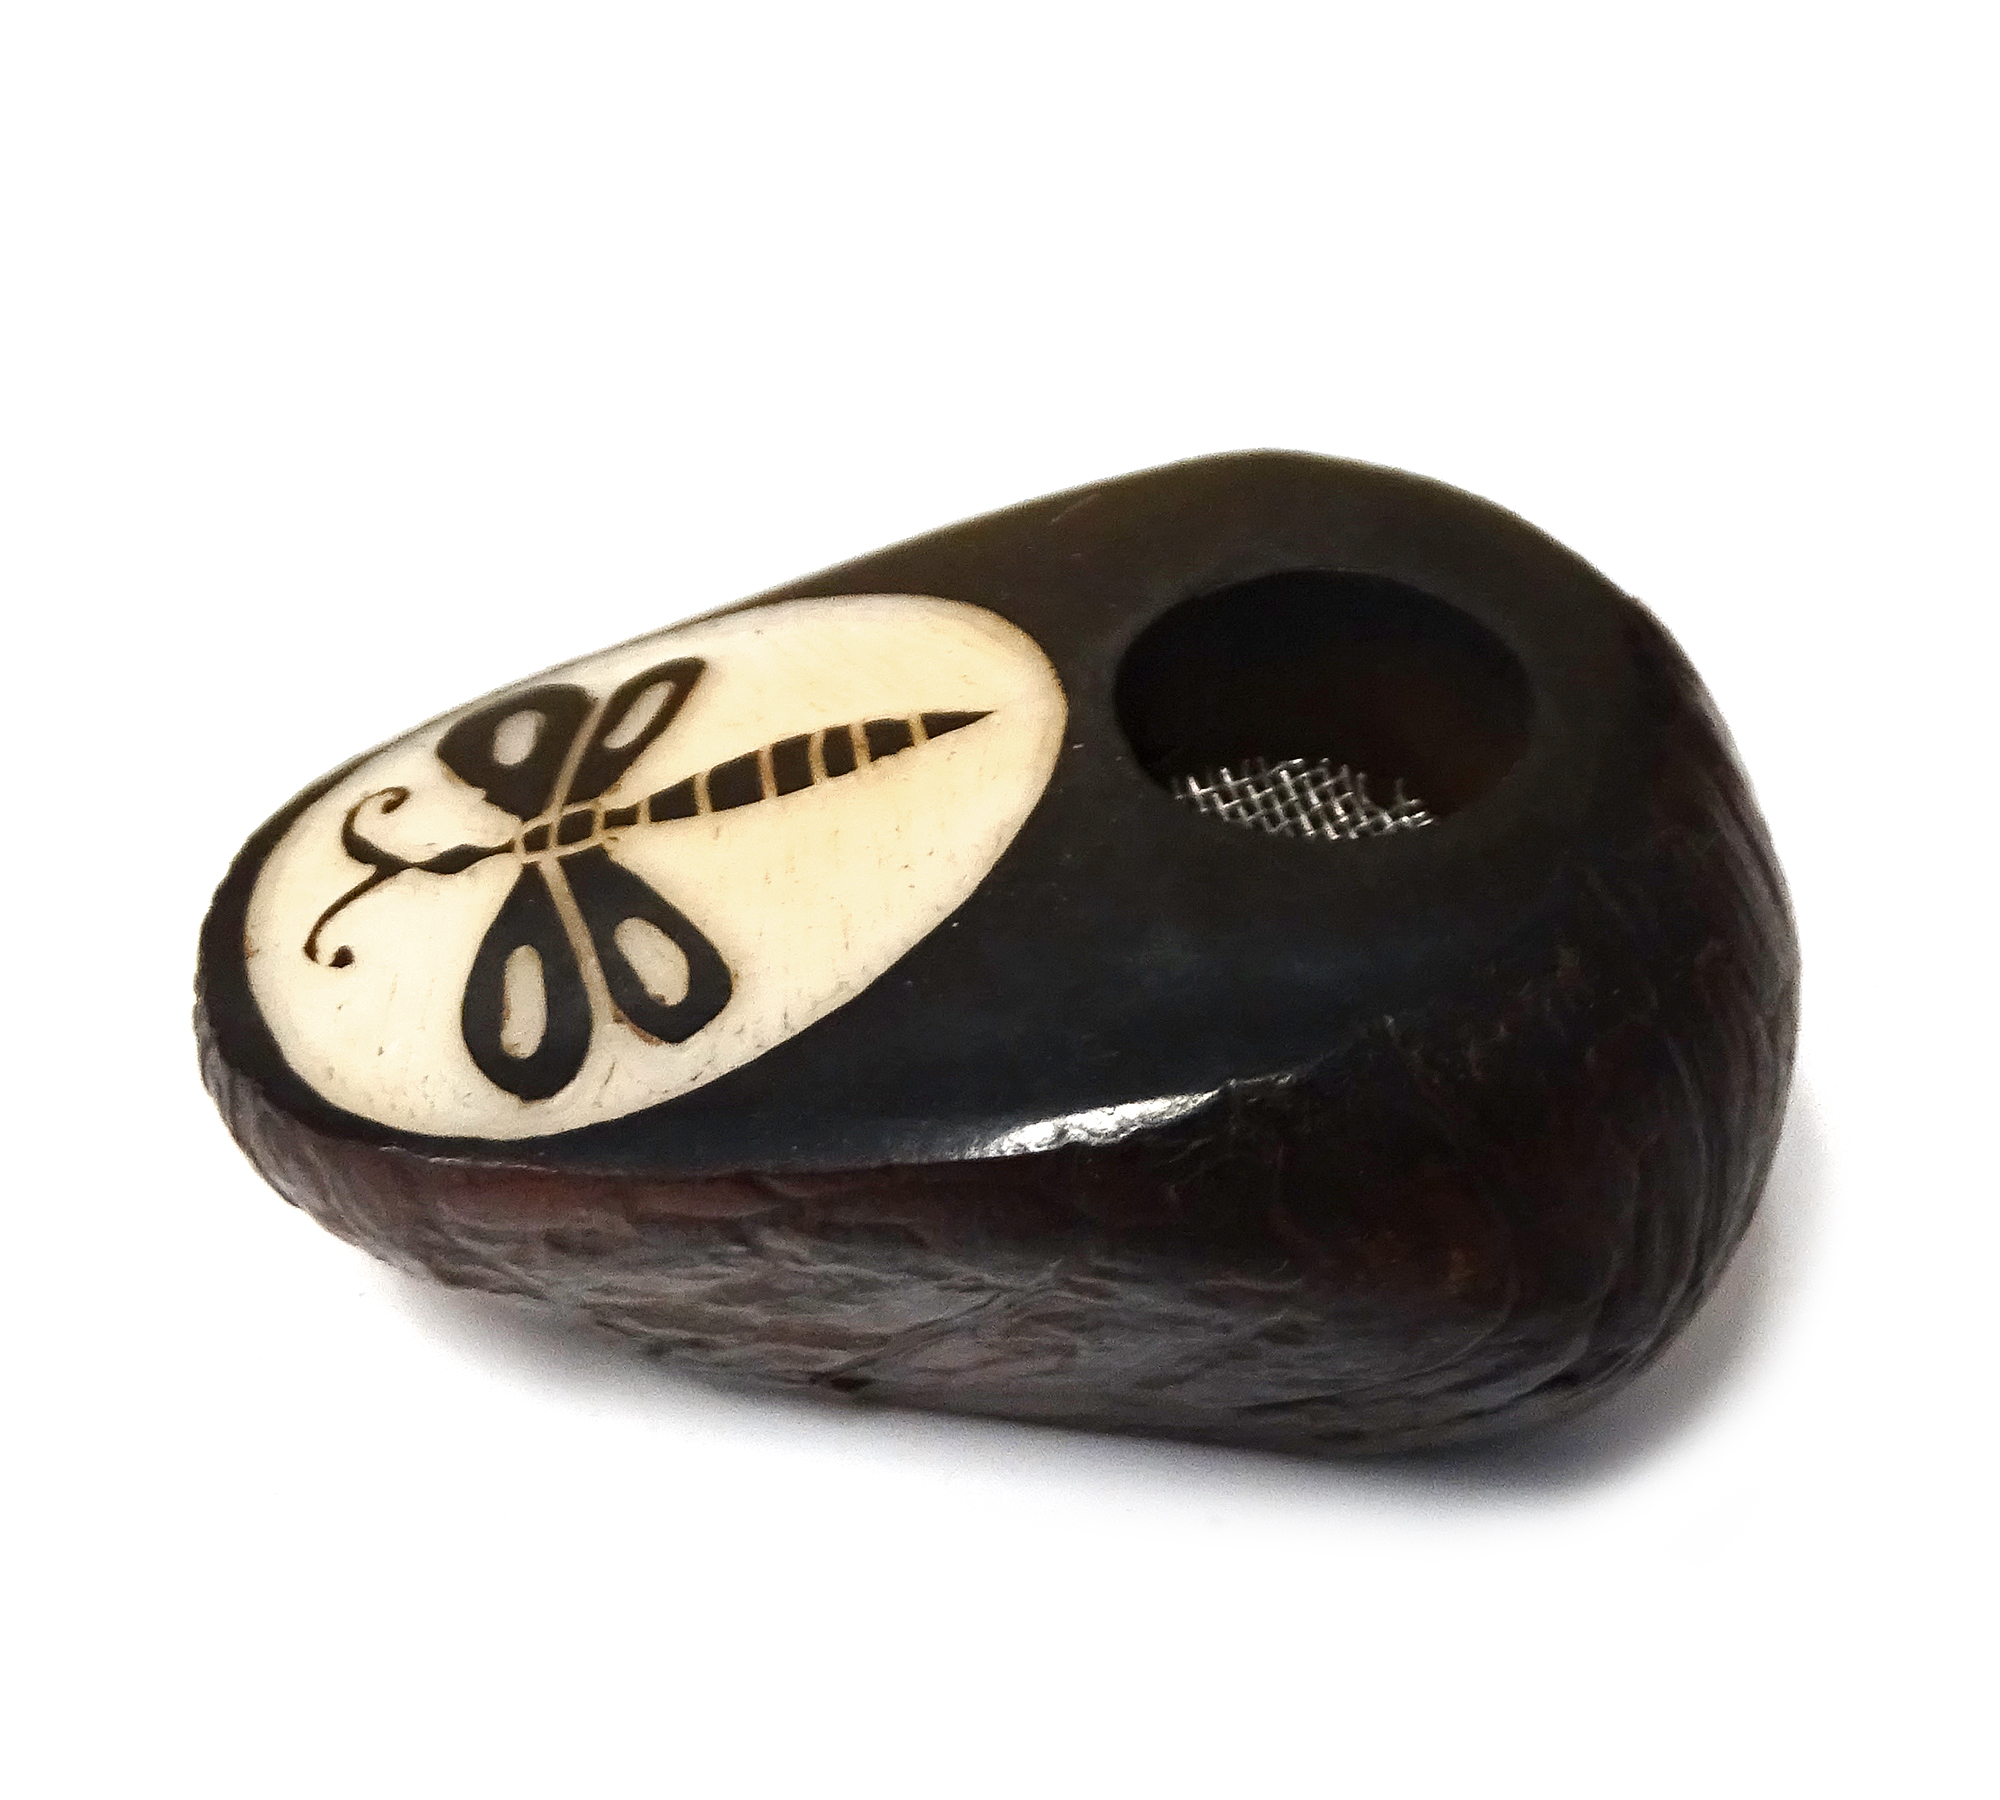 Handcarved tobacco smoking mini round natural tagua nut hand pipe bowl of a dragonfly.